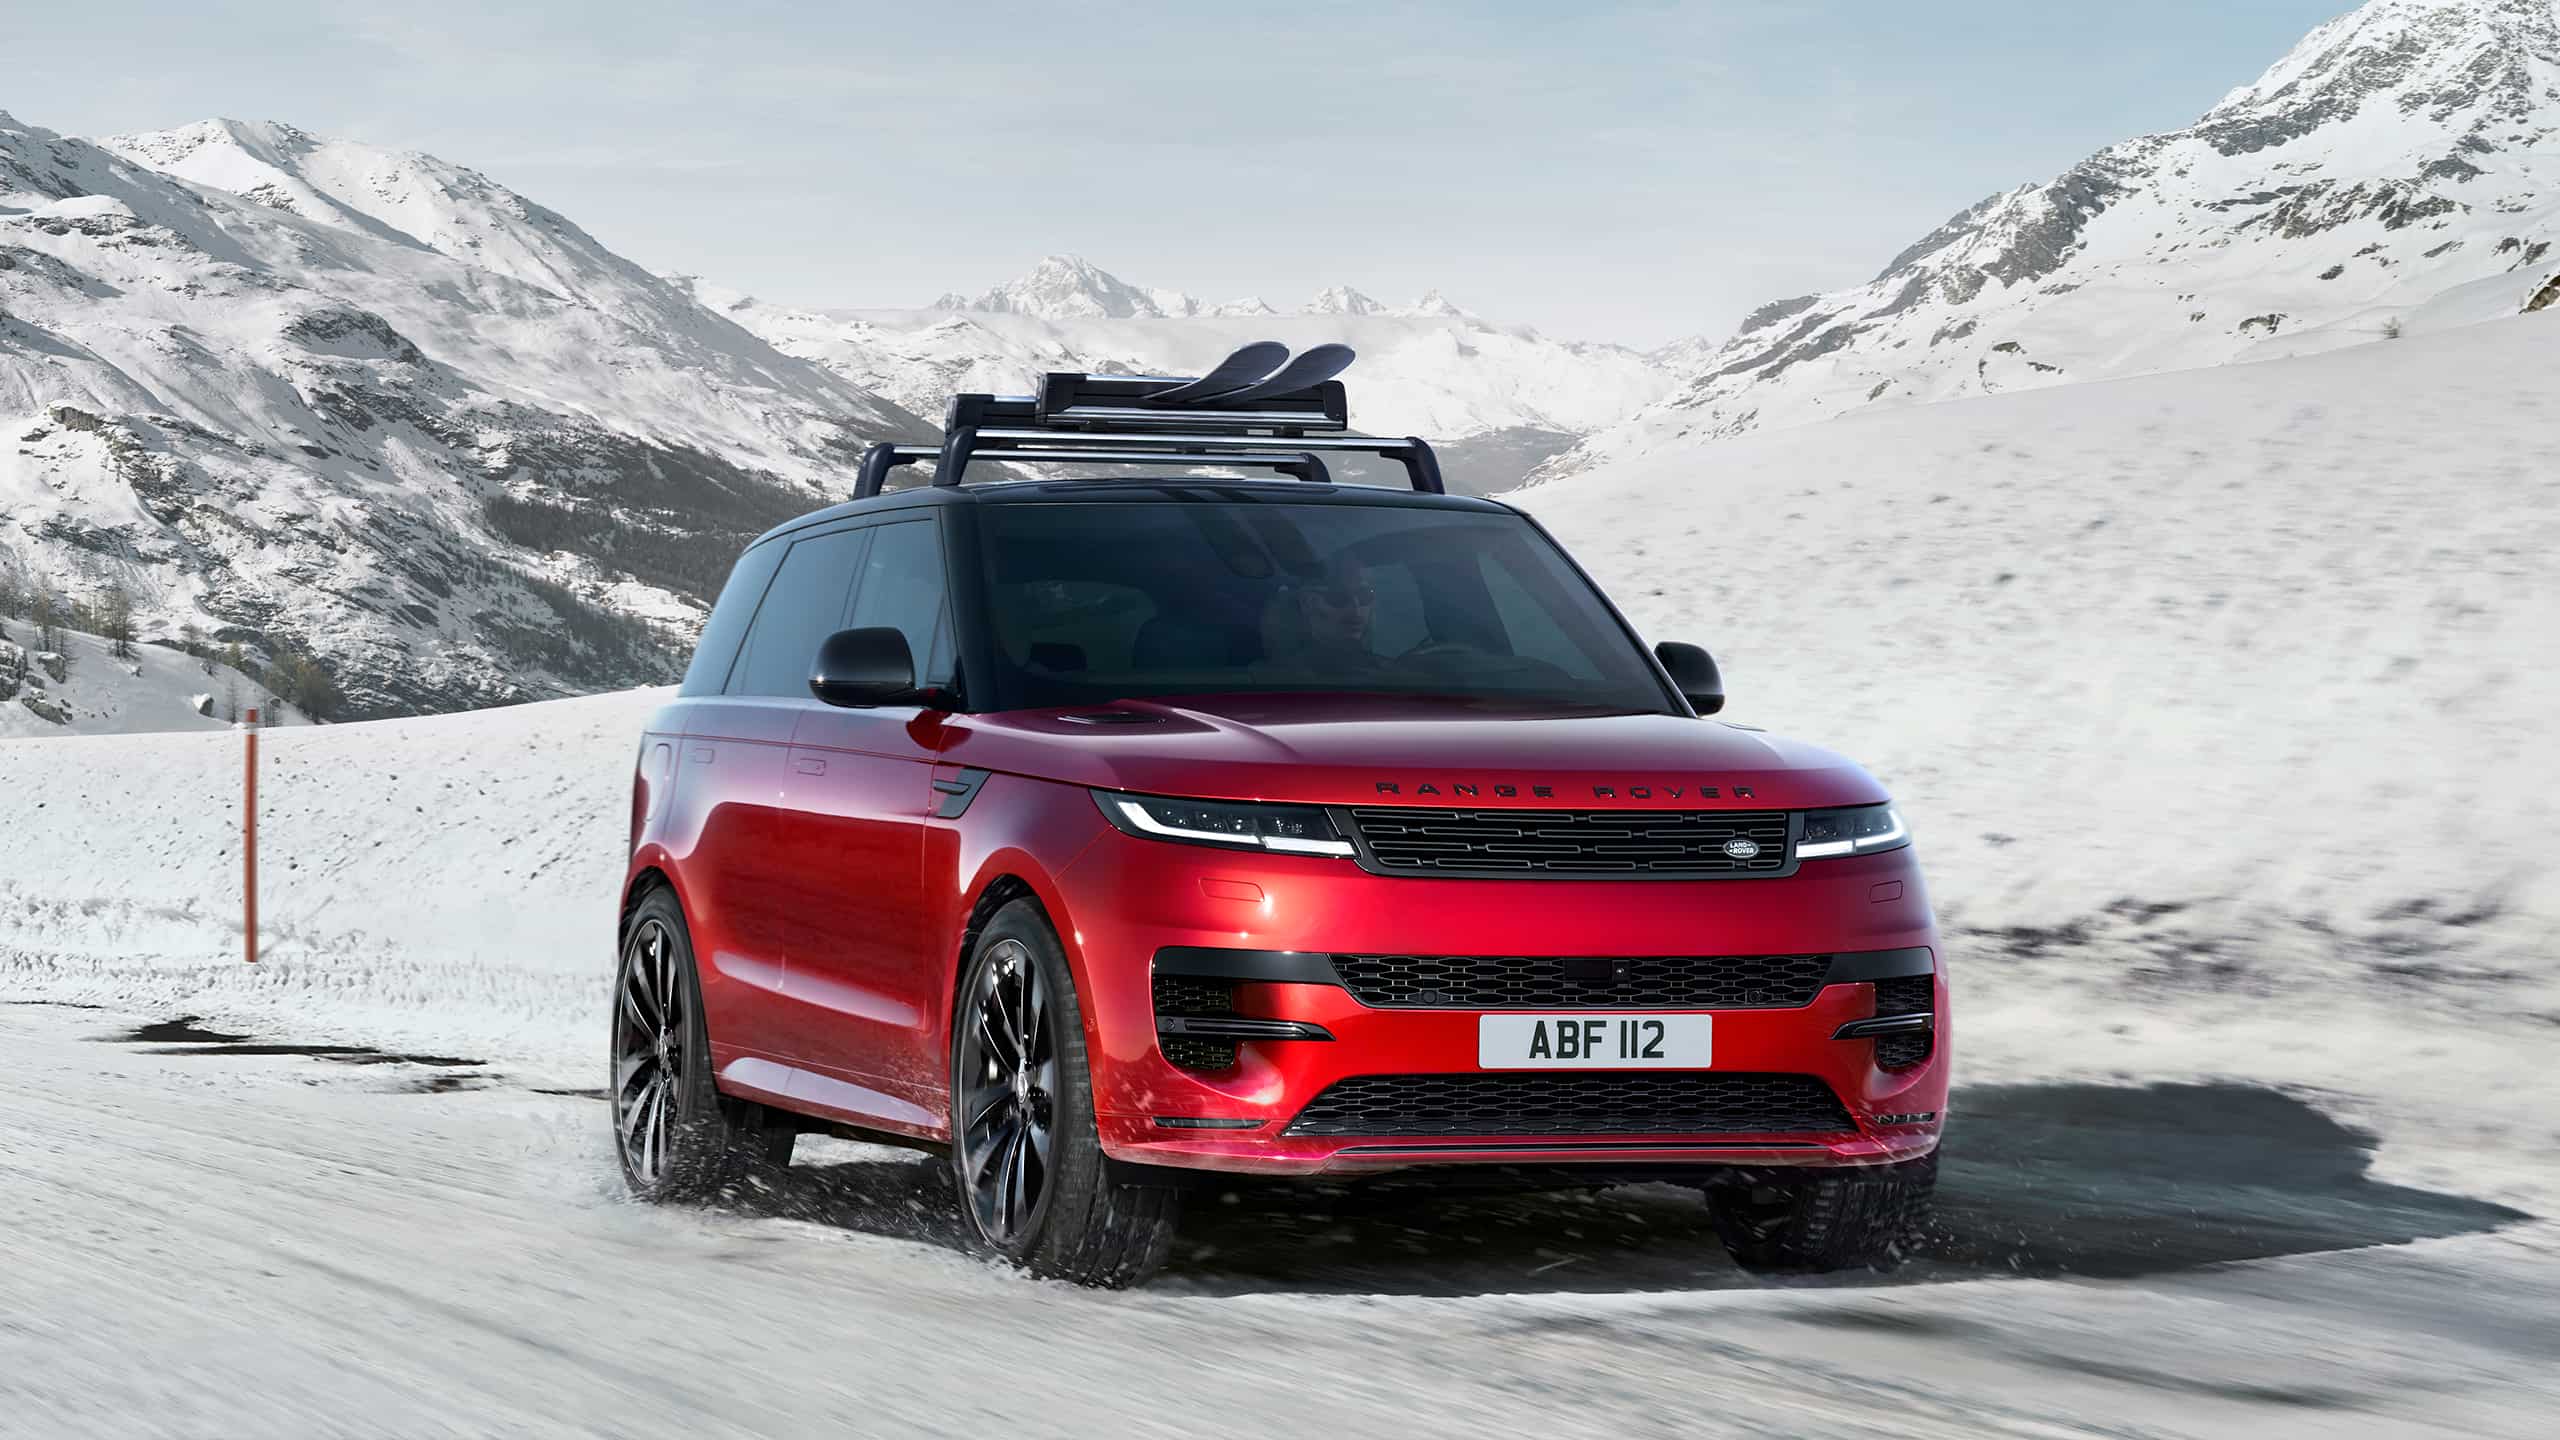 Range Rover Sport is Driving on Over Icy Mountain